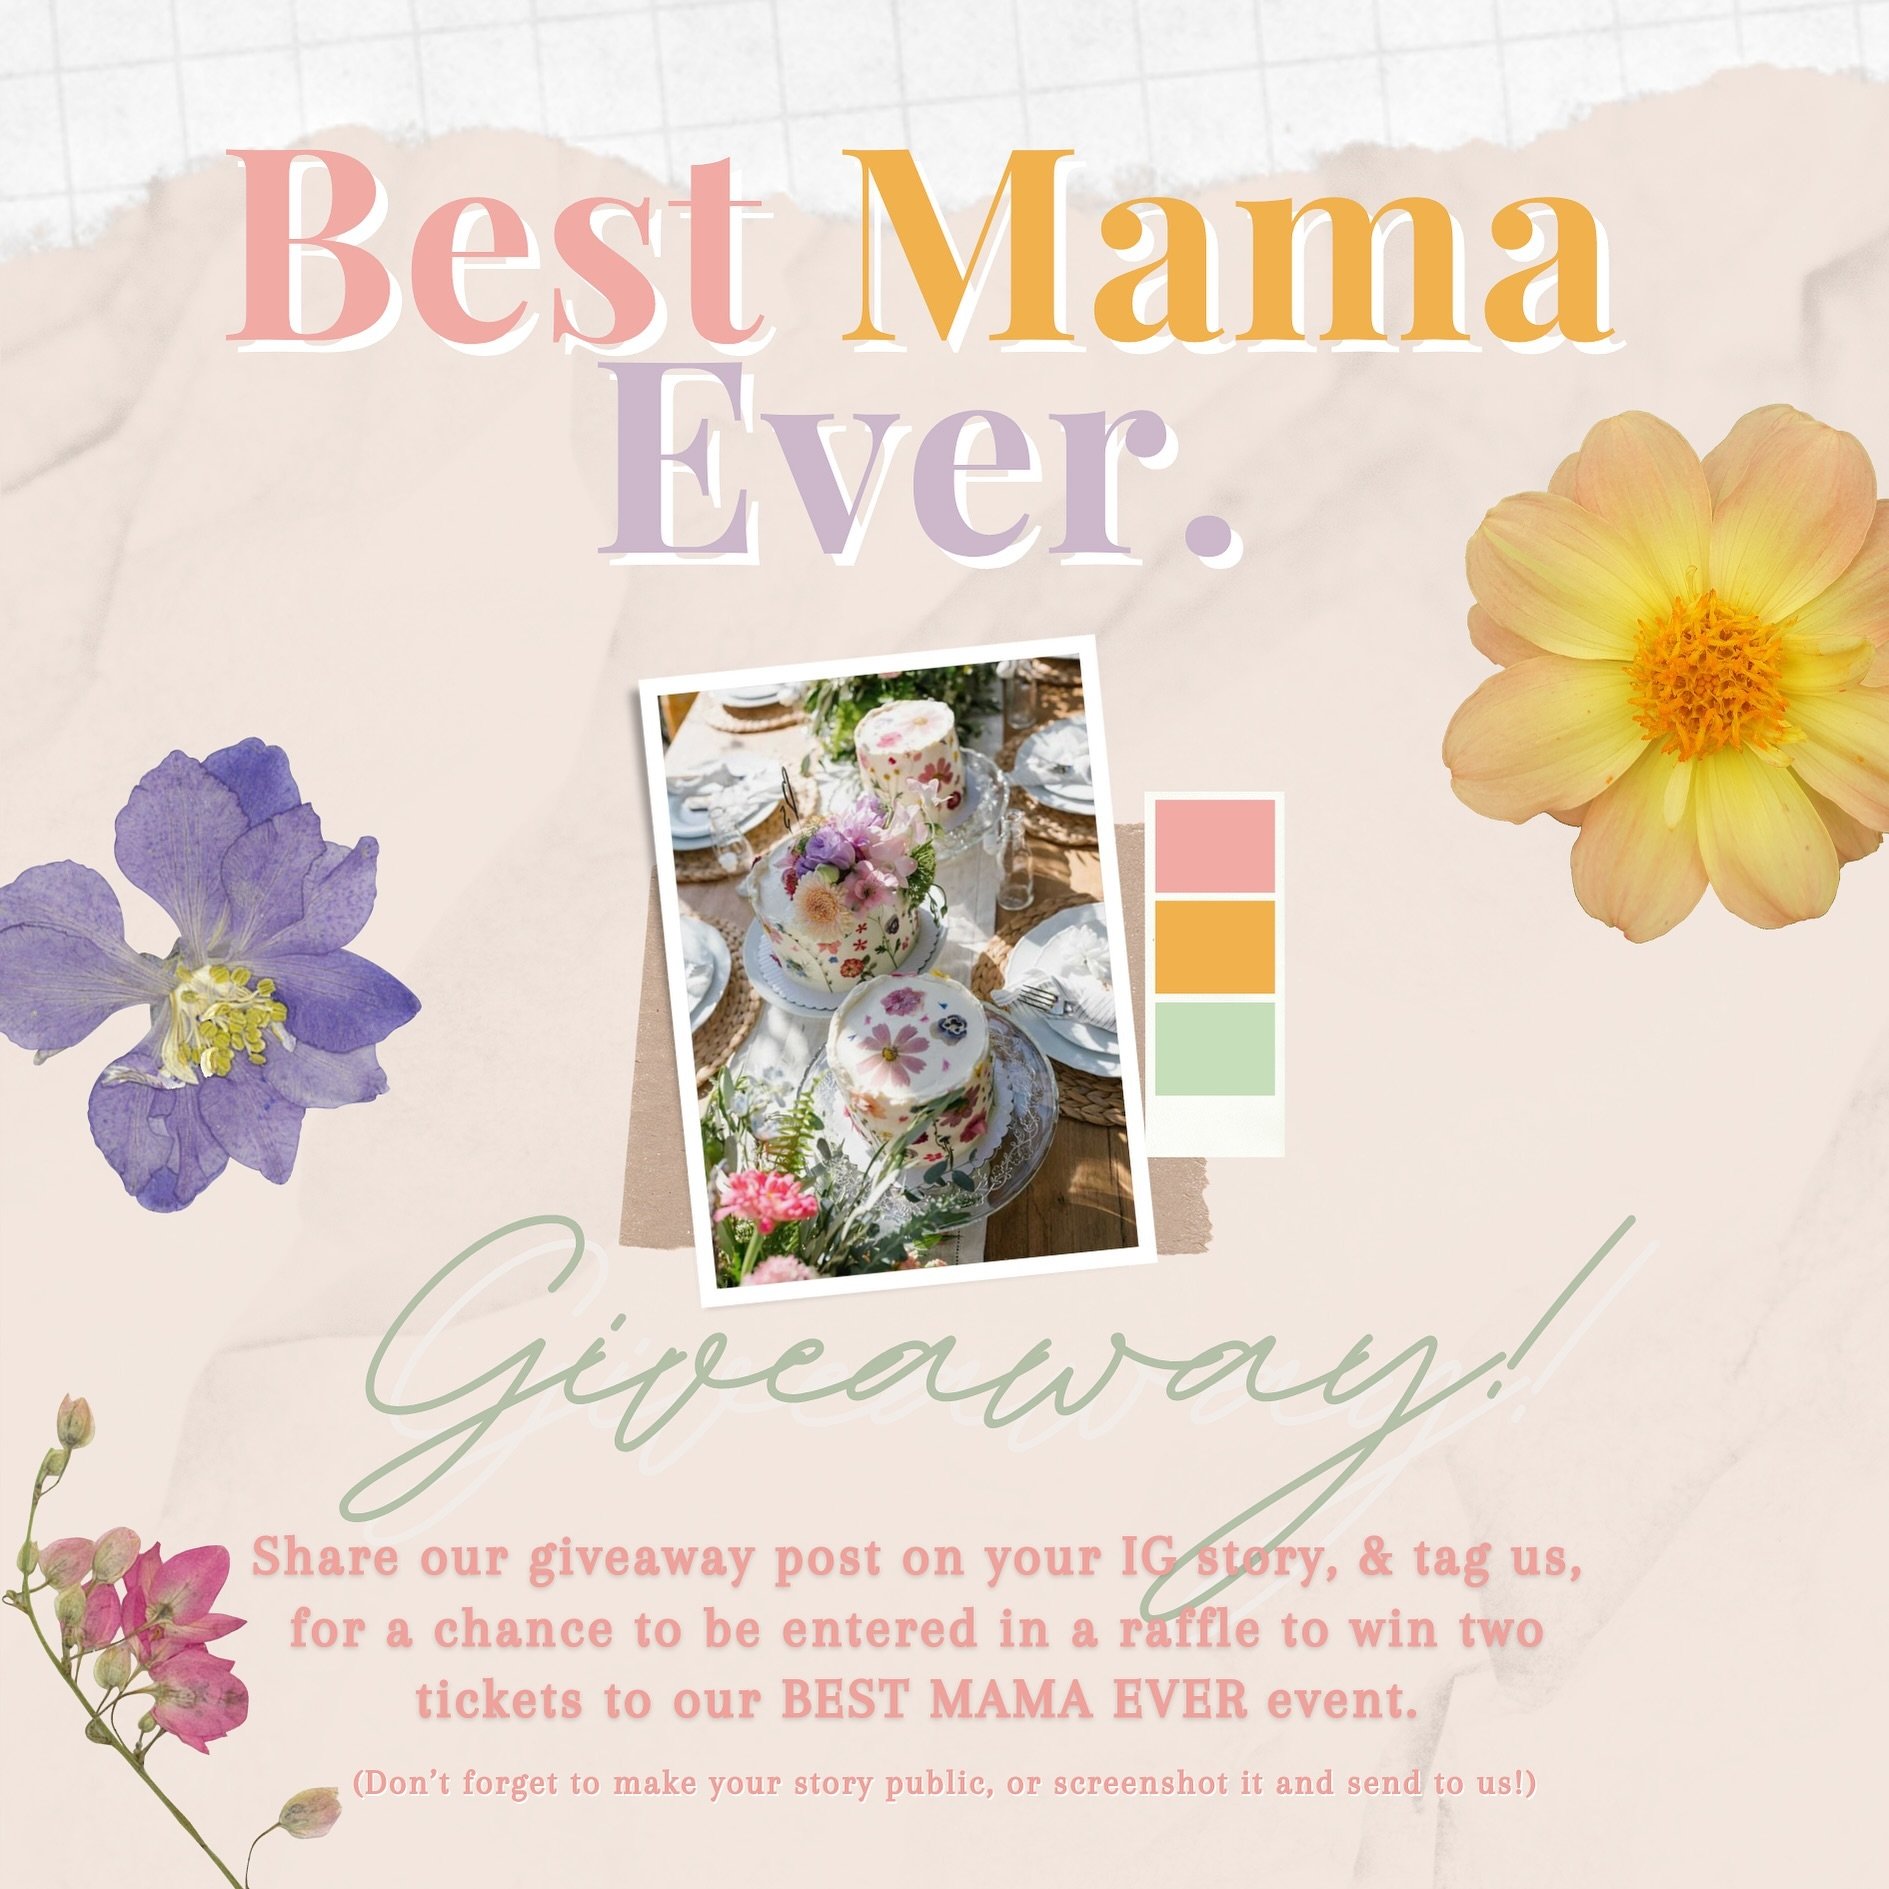 ✨✨🌸🚨GIVEAWAY ALERT 🚨🌼✨✨

We are giving away TWO TICKETS to our BEST MAMA EVER EVENT! To be entered in our giveaway, all you have to do is share our post to your story &amp; tag us so that we&rsquo;re able to enter you in the giveaway! (MAKE SURE 